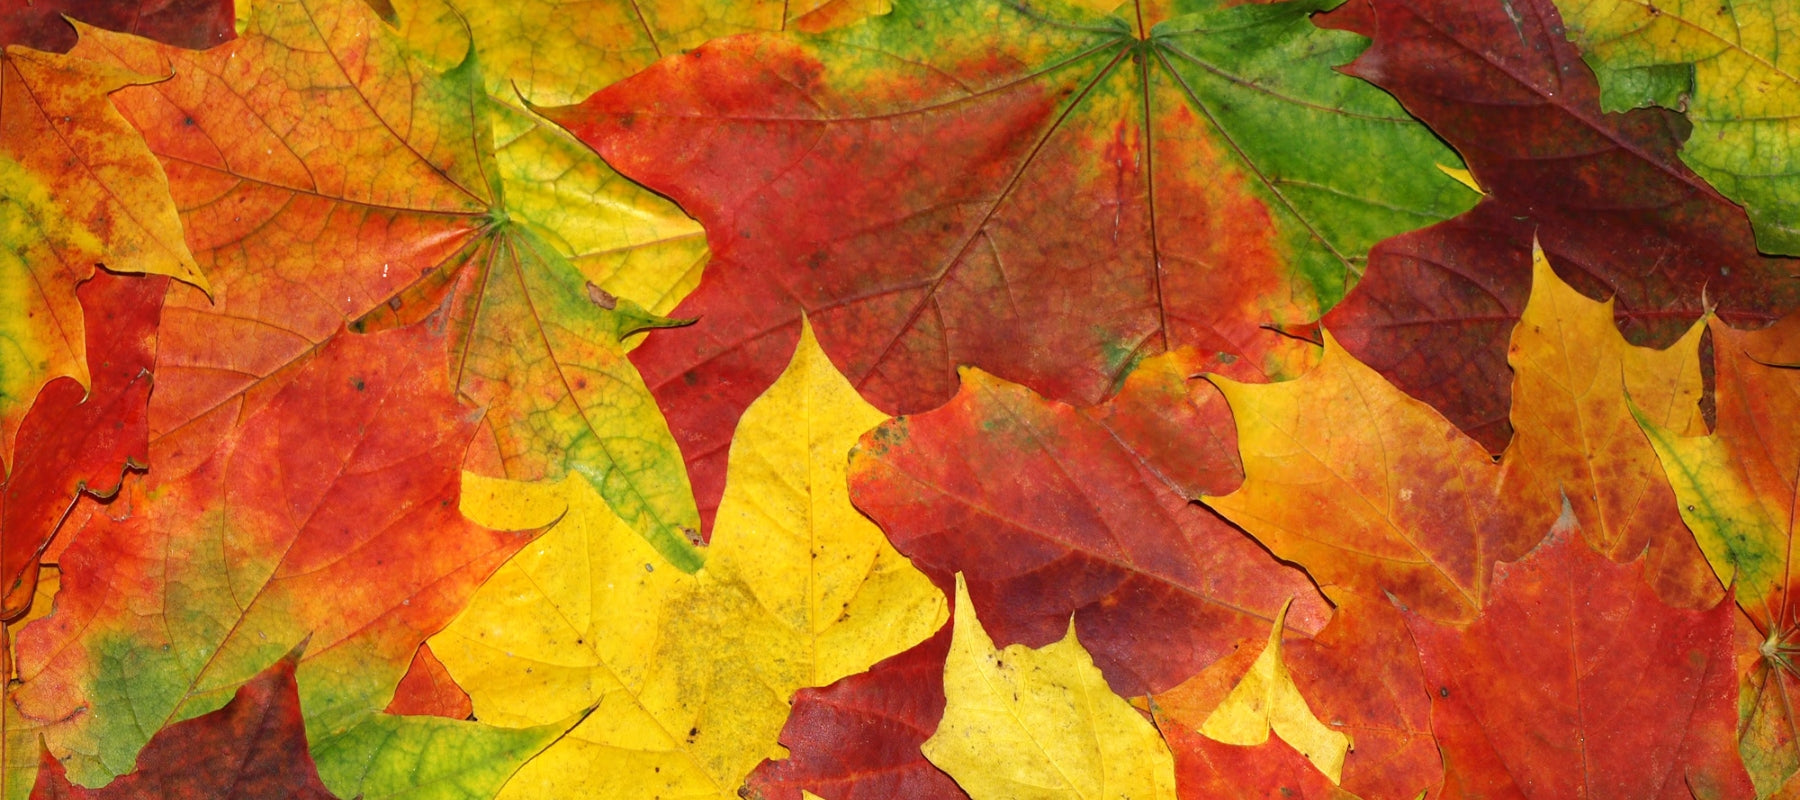 The science behind autumn foliage colour